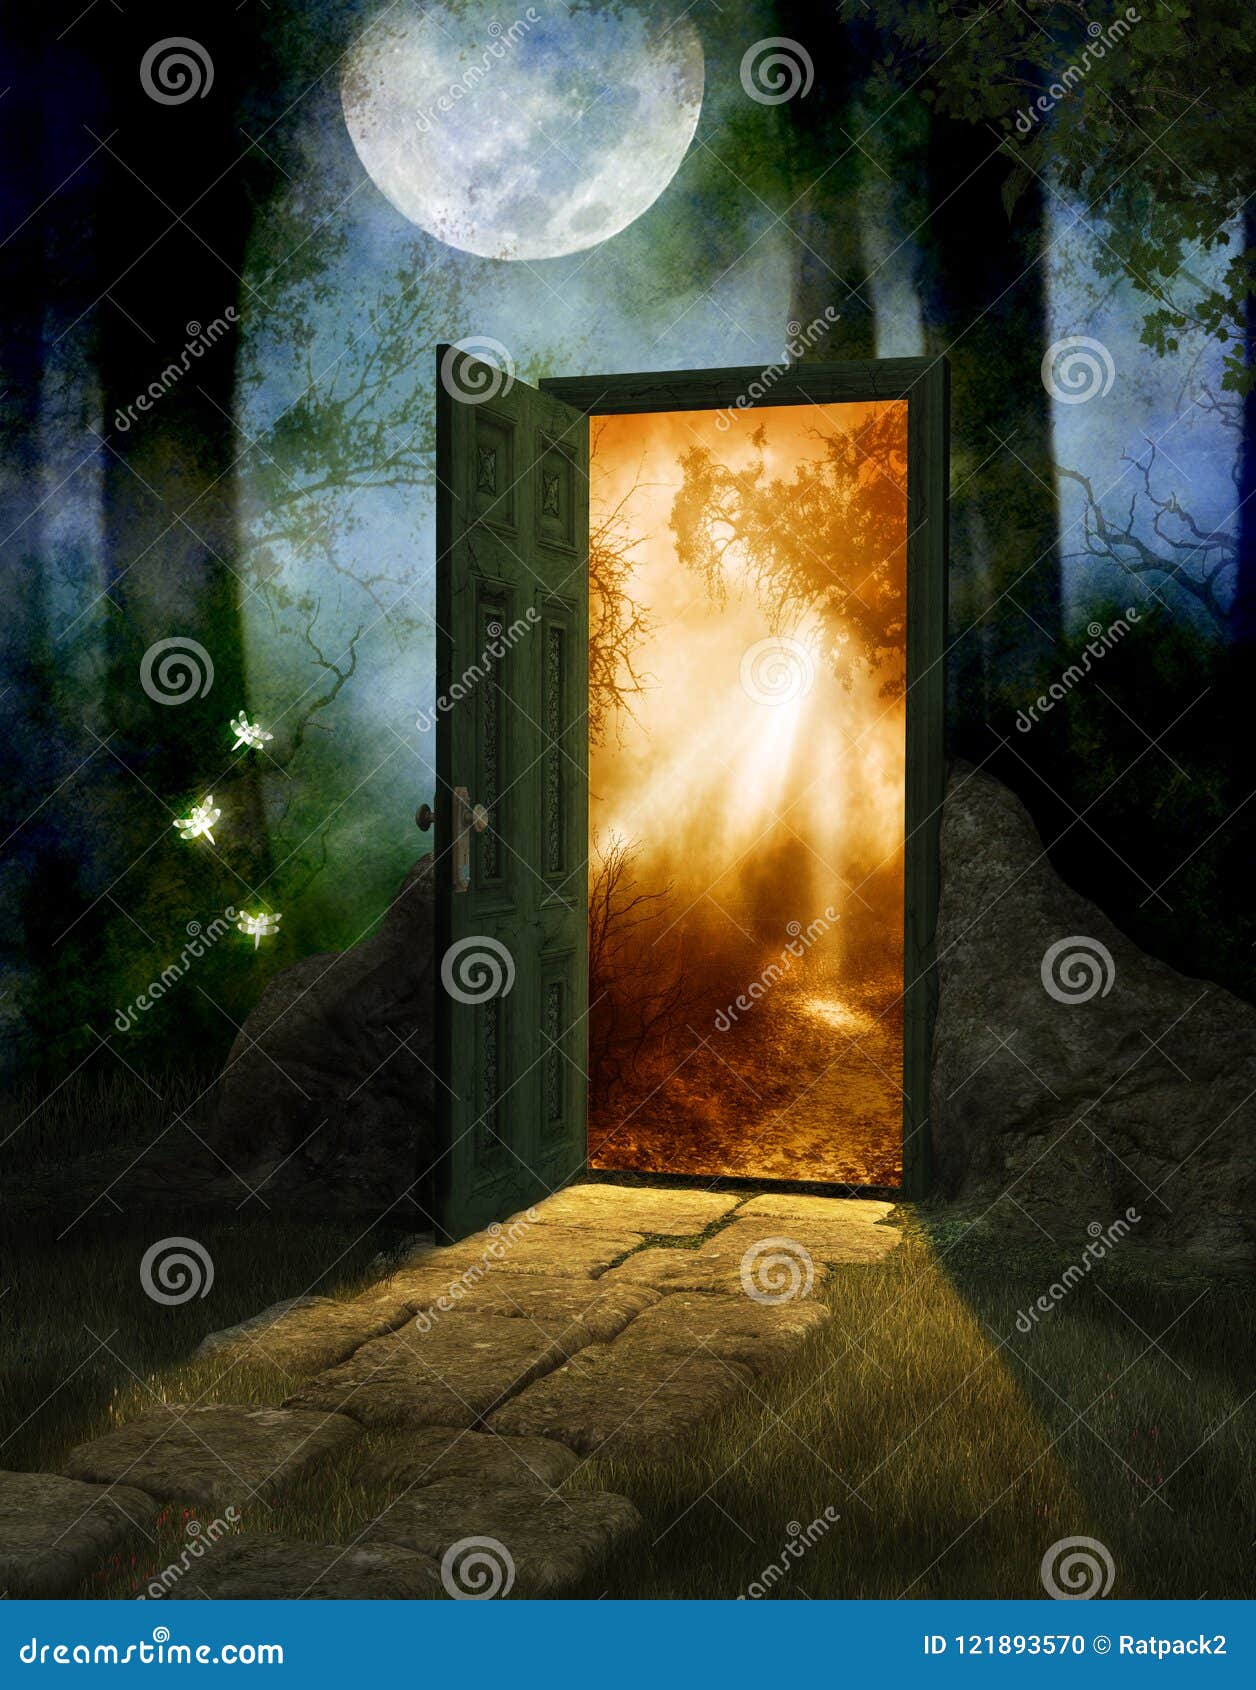 magical fairy wood with door to new world